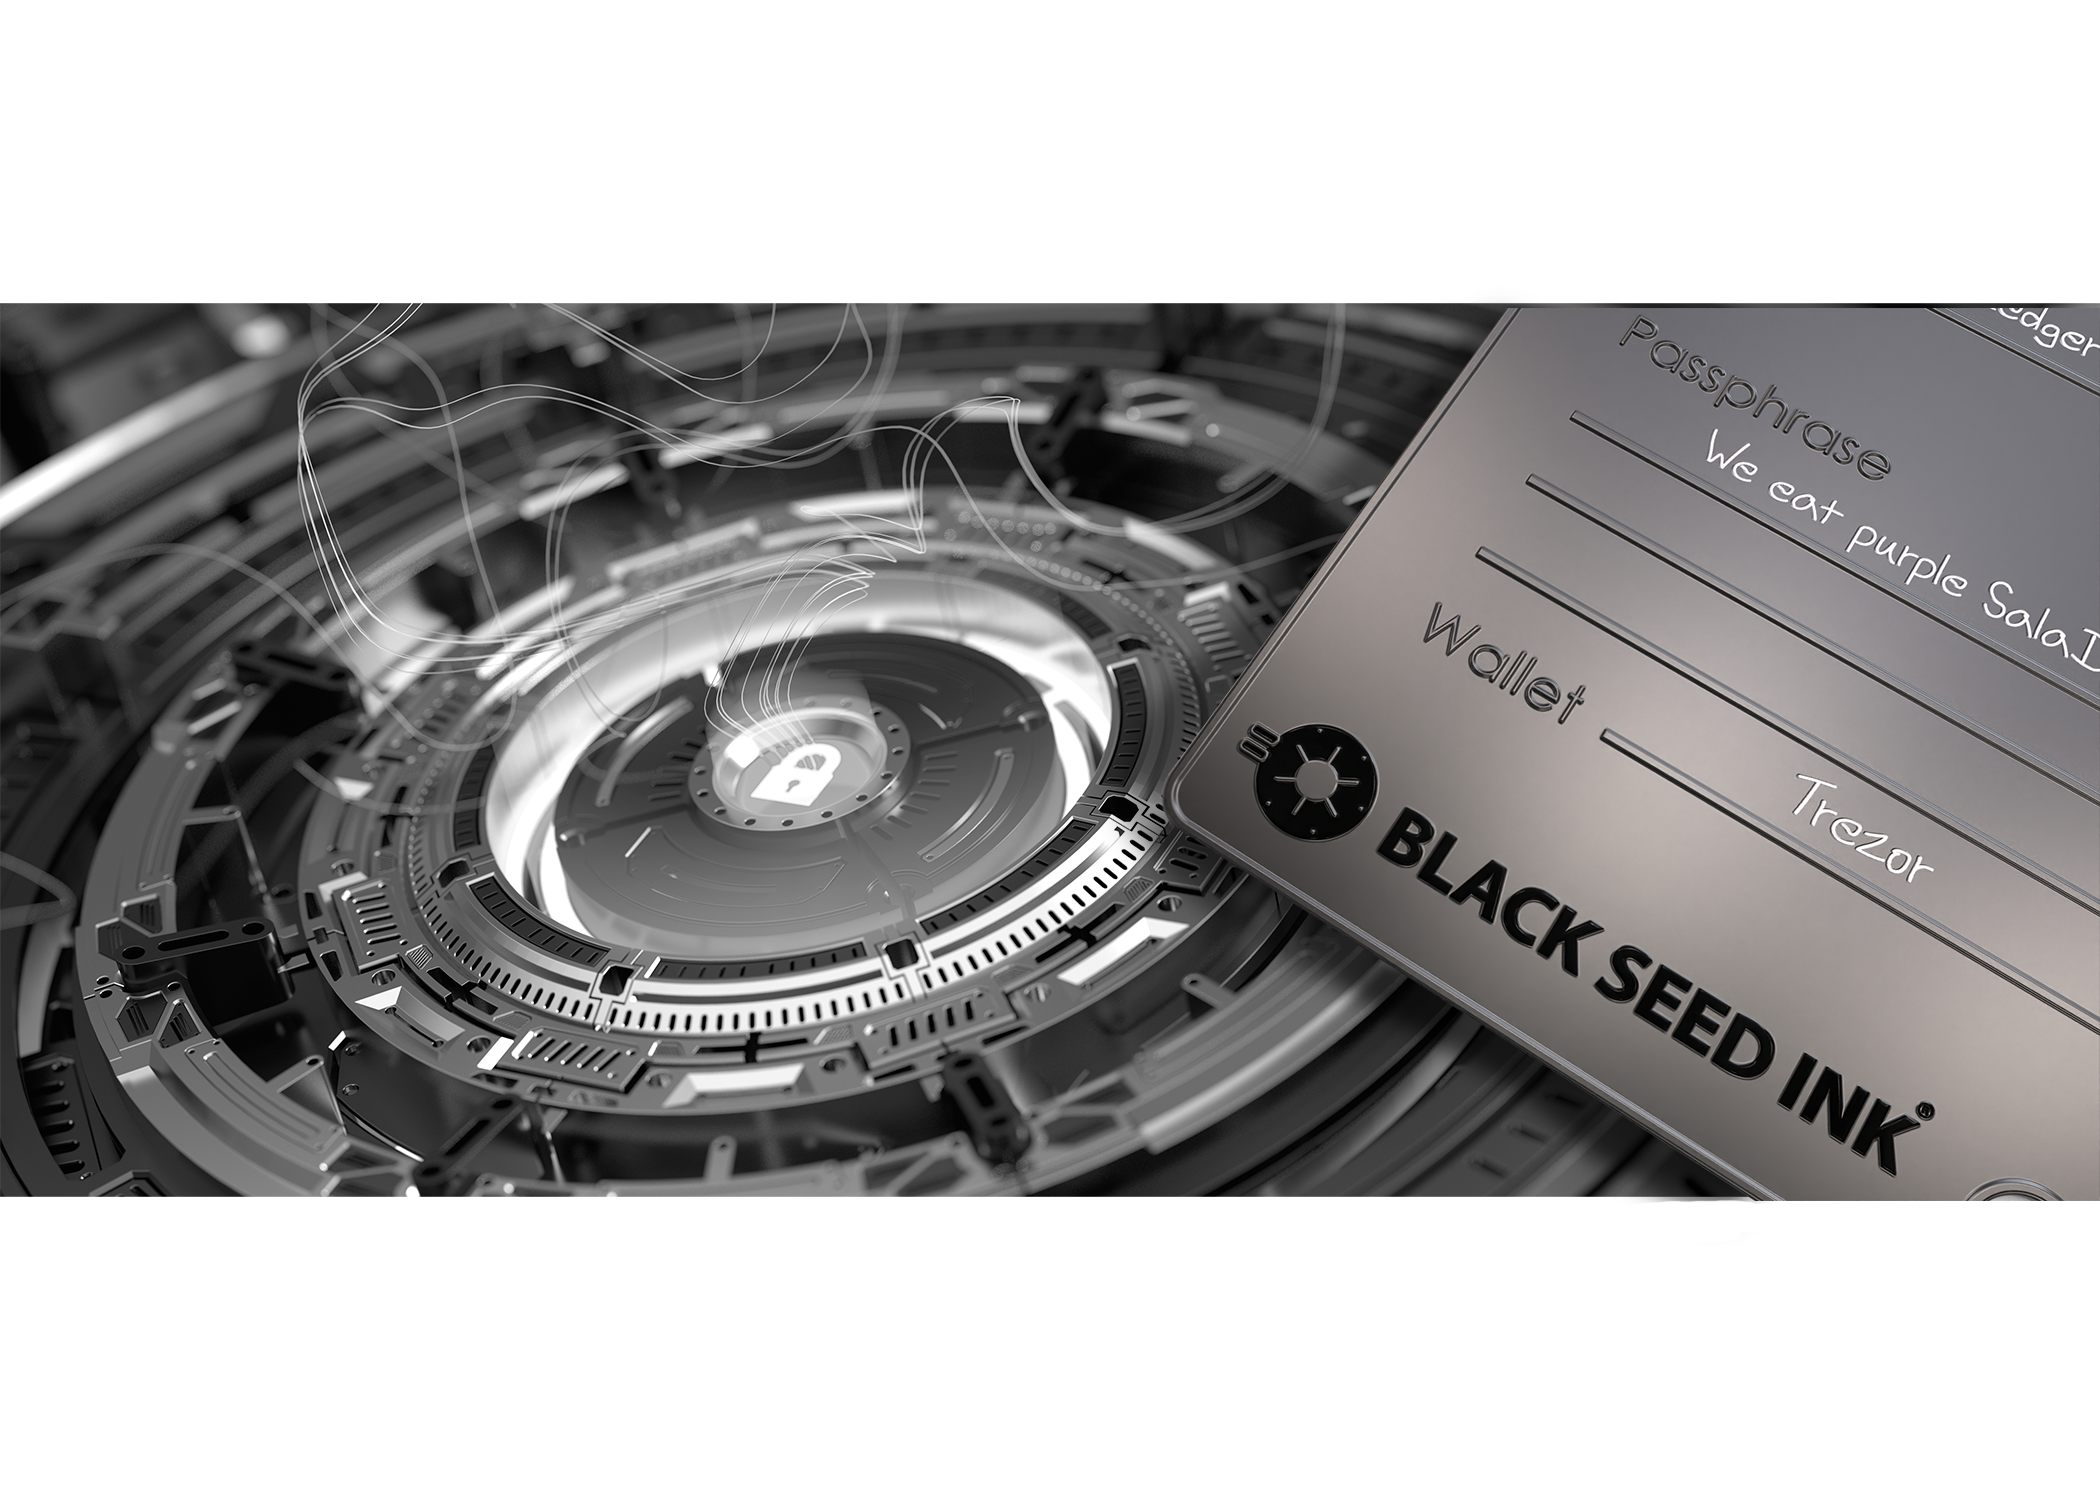 Black Seed Ink passphrase plate with scribed text.